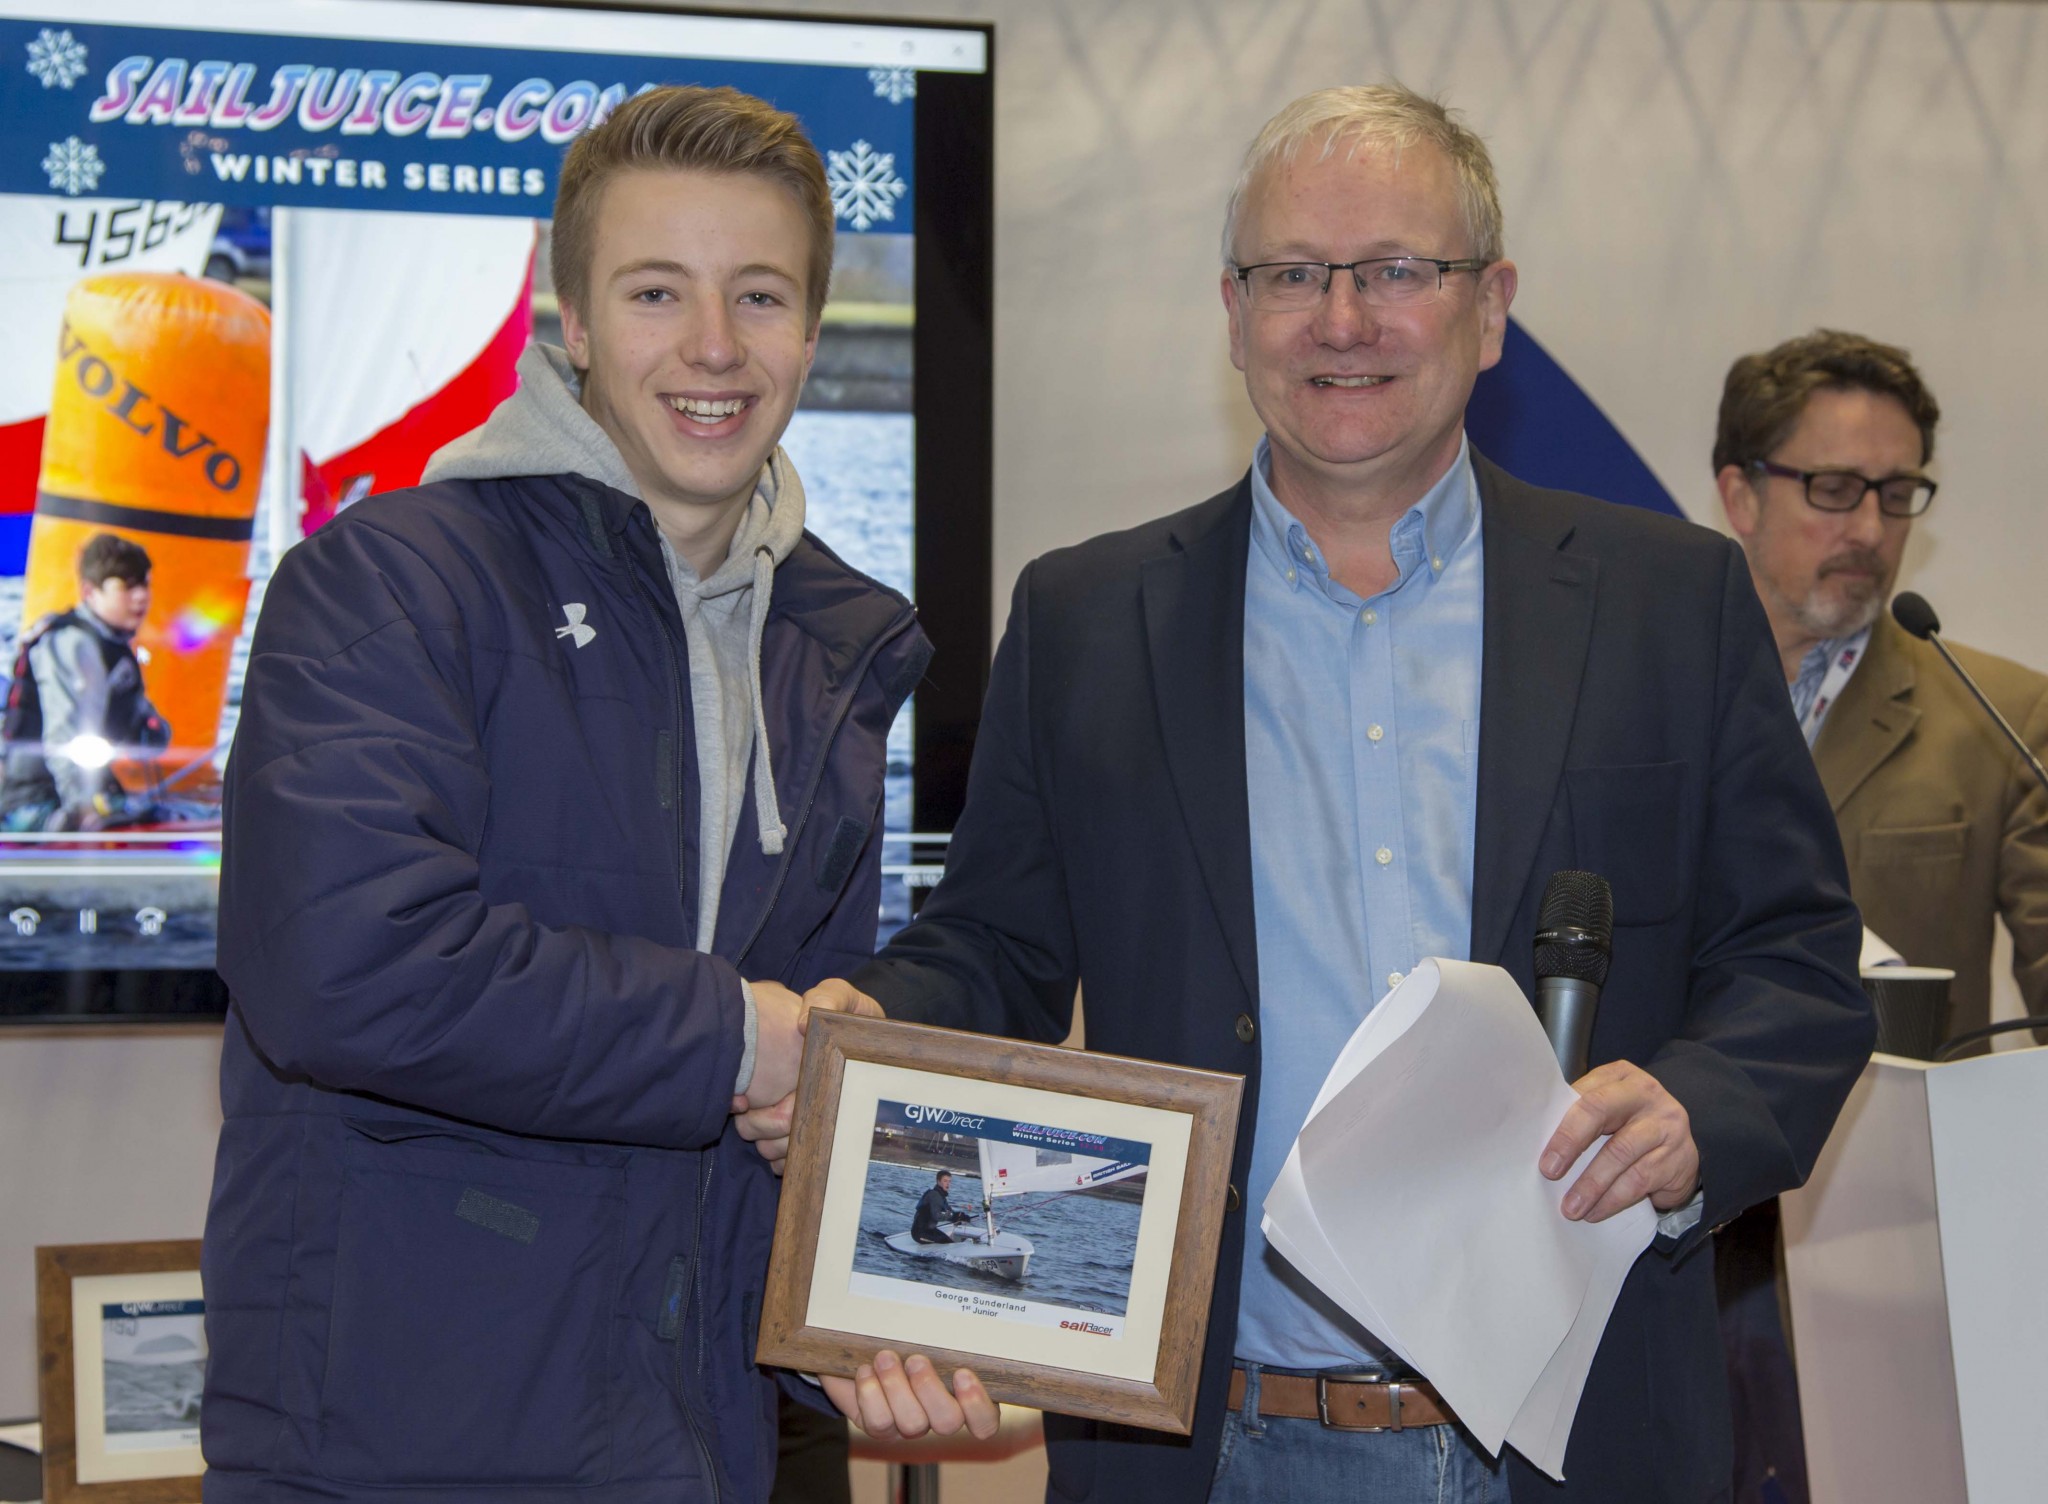 goodwin-crowned-winter-champion-at-dinghy-show